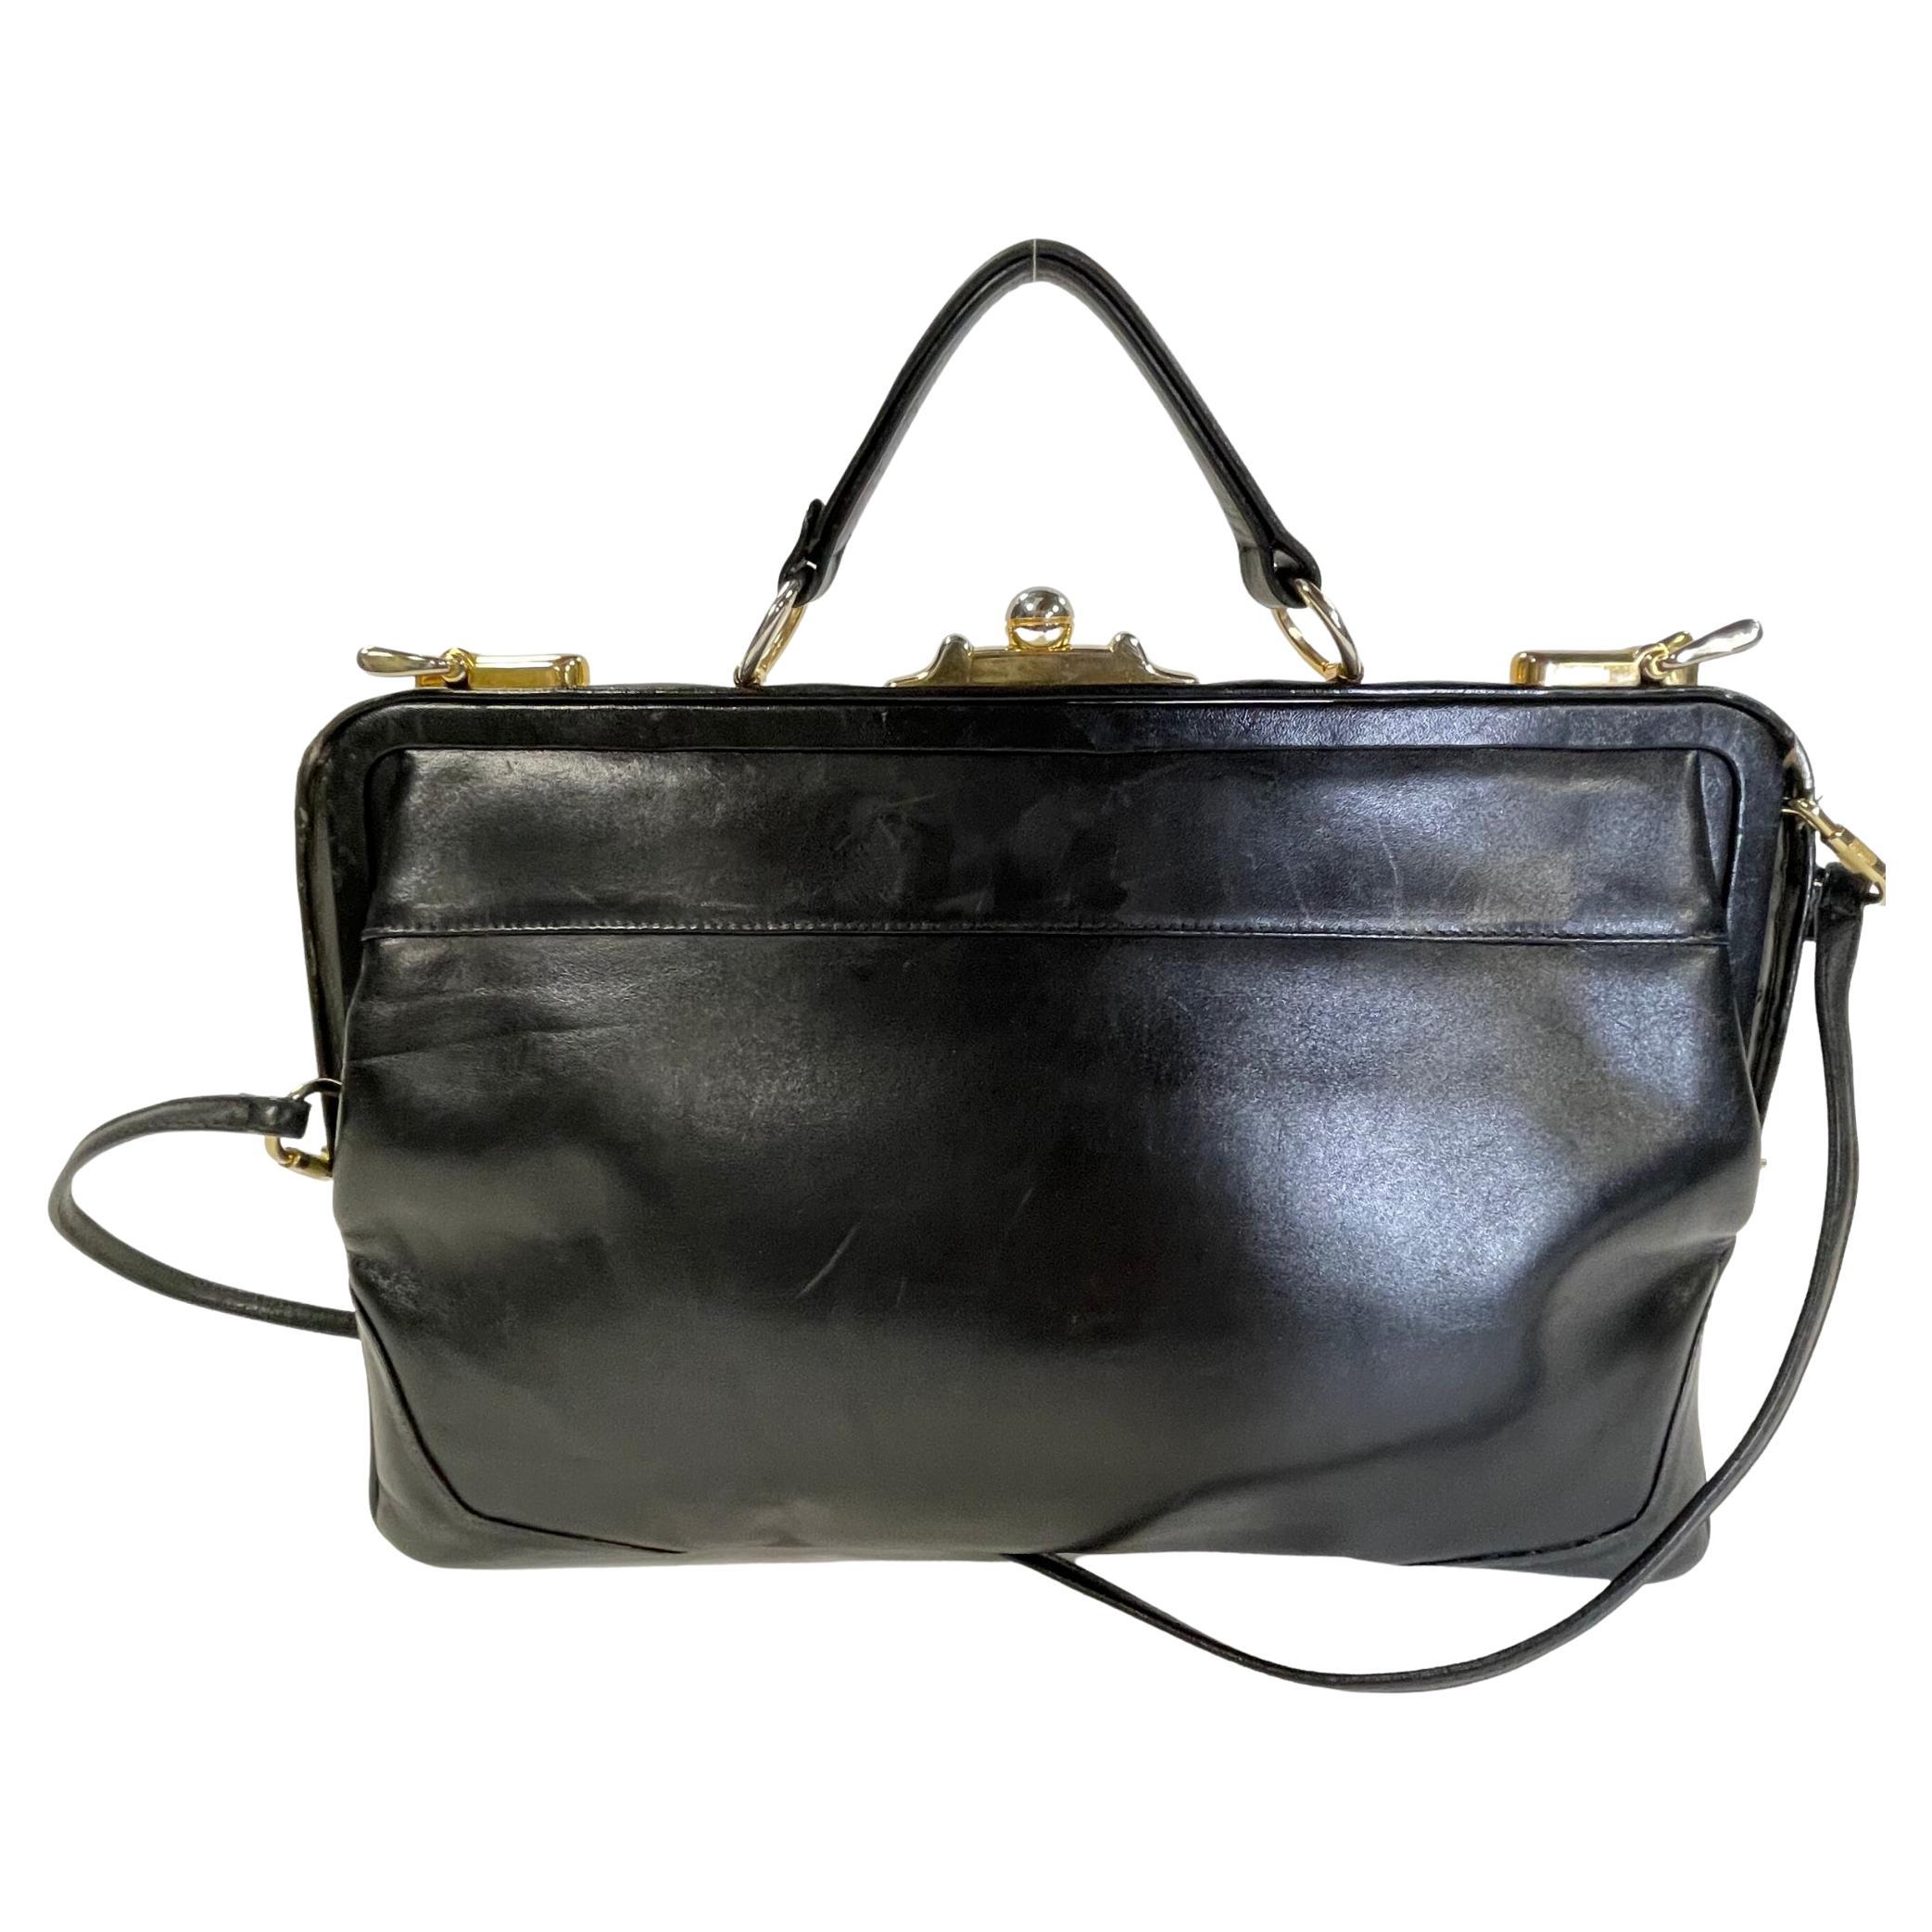 Color: Black
Material: Leather
Item Code: 495151
Measures: H 9” x L 14” x D 2”
Drop: 5”
Condition: Good. Many scratches and marks throughout.

Made in Italy